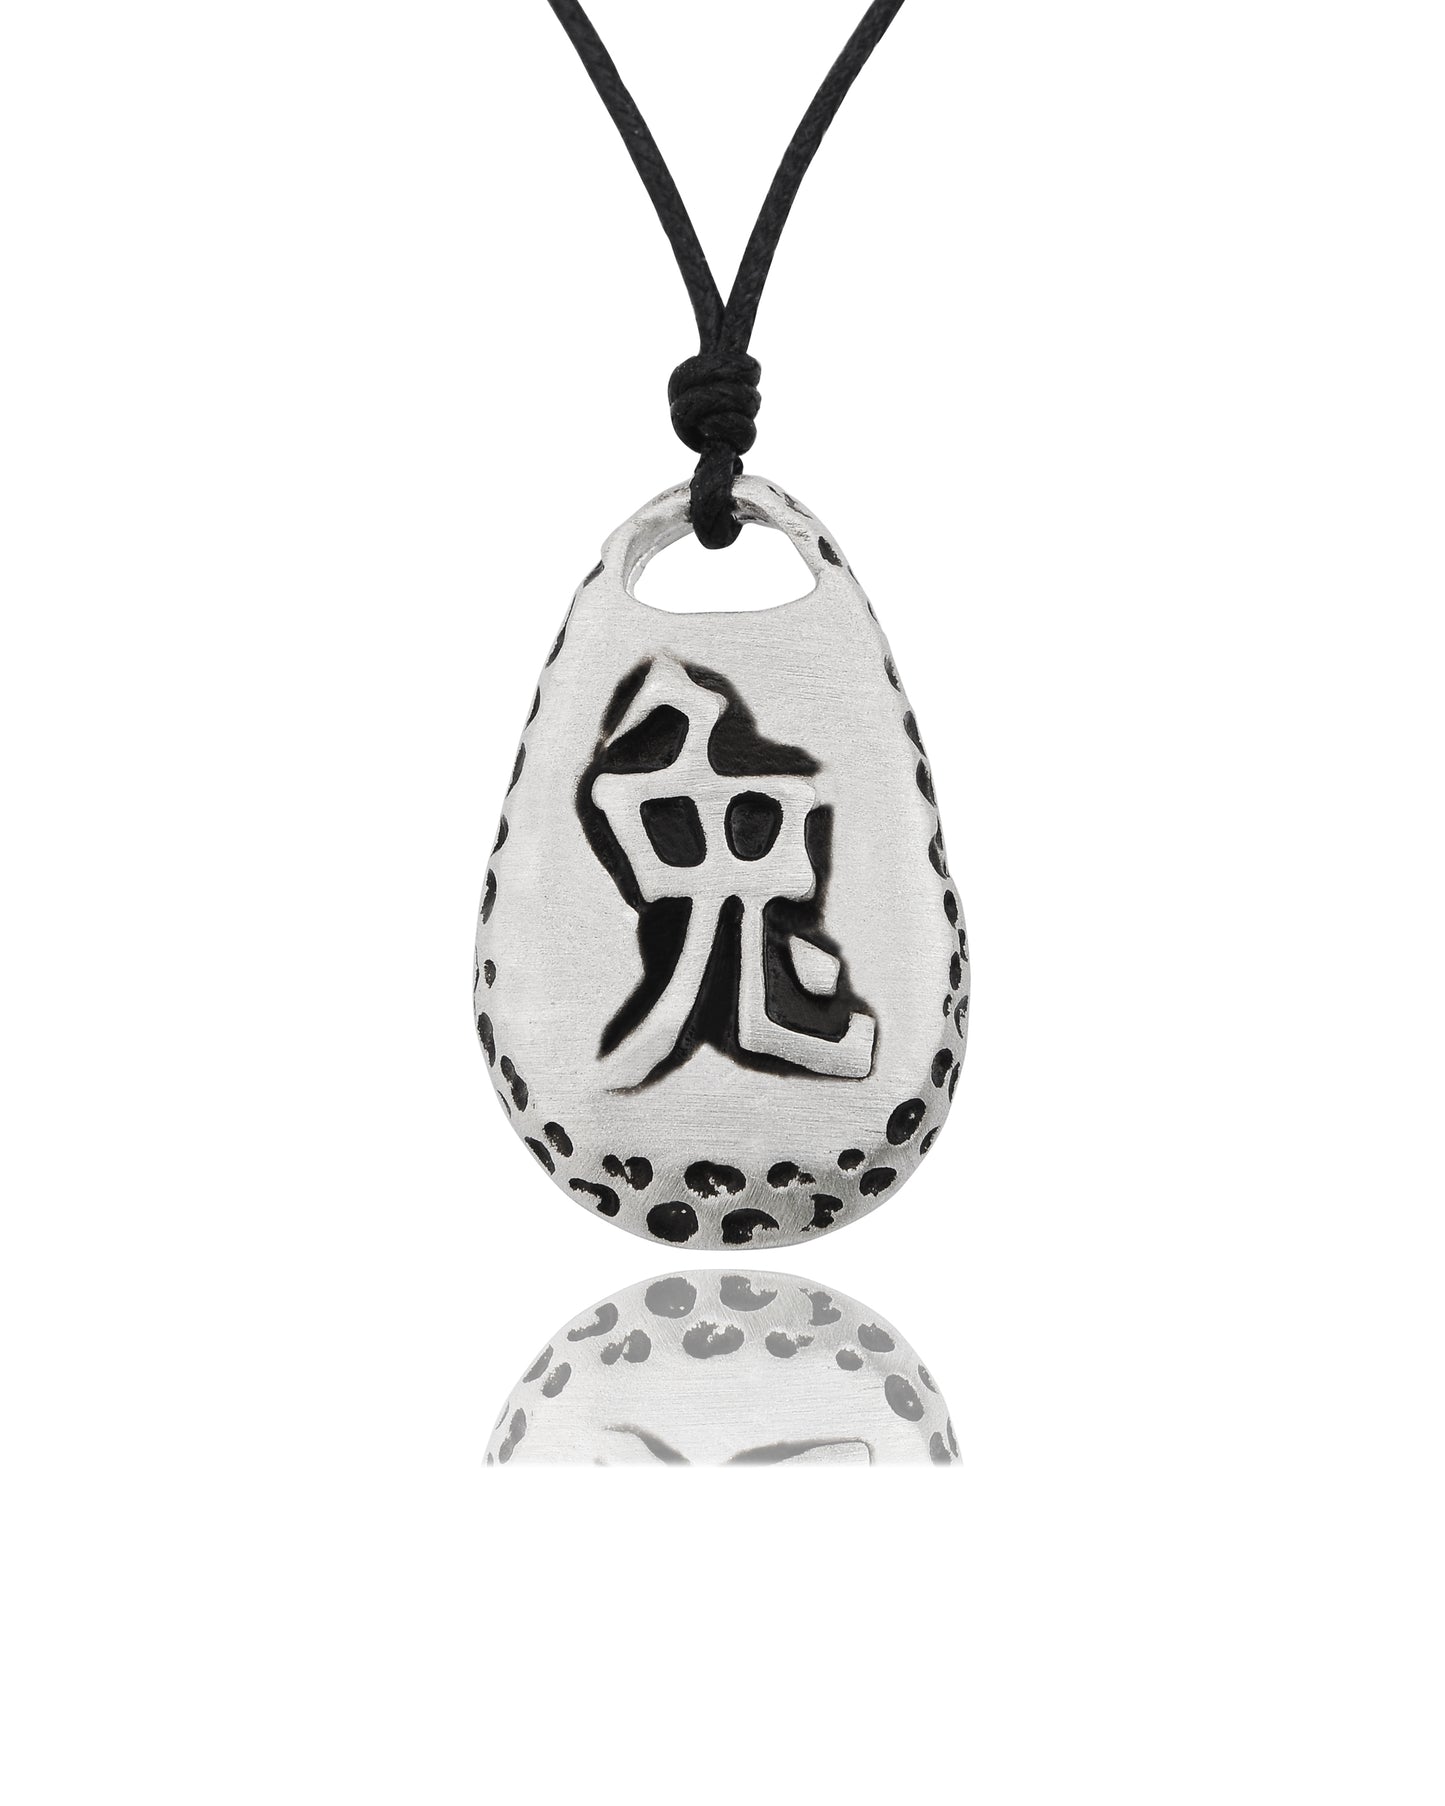 Chinese Zodiac Text Silver Pewter Charm Necklace Pendant Jewelry